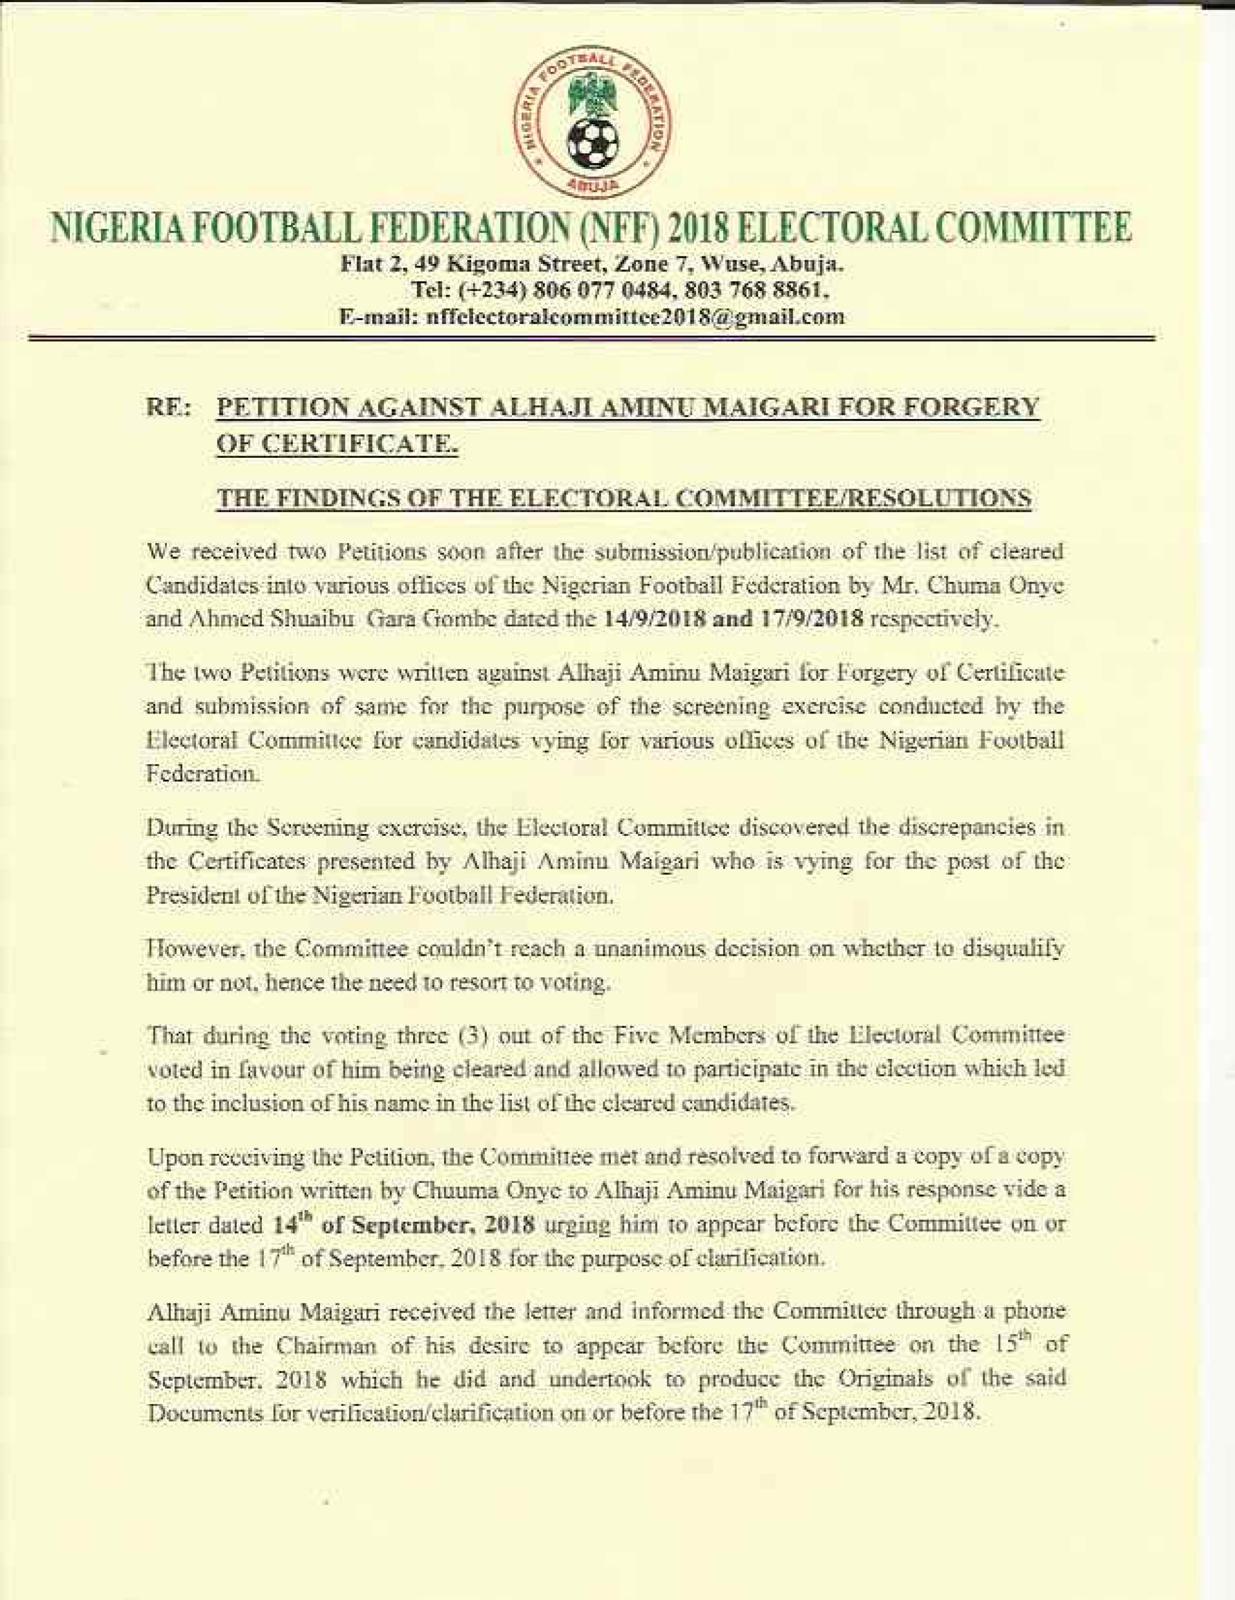 The NFF committee's findings (I)